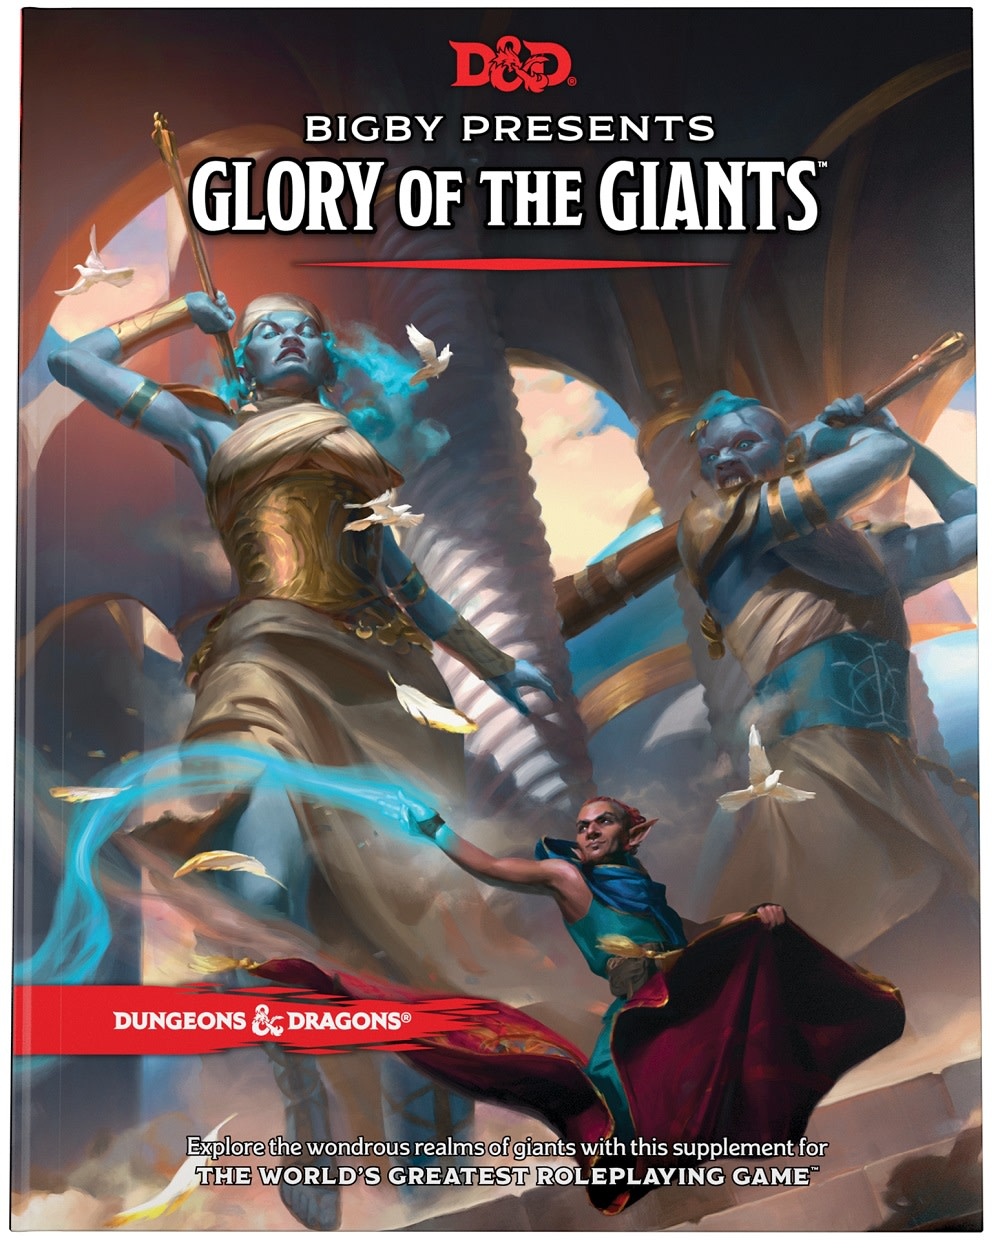 Dungeons and Dragons 5th Edition RPG: Bigby Presents Glory of the Giants